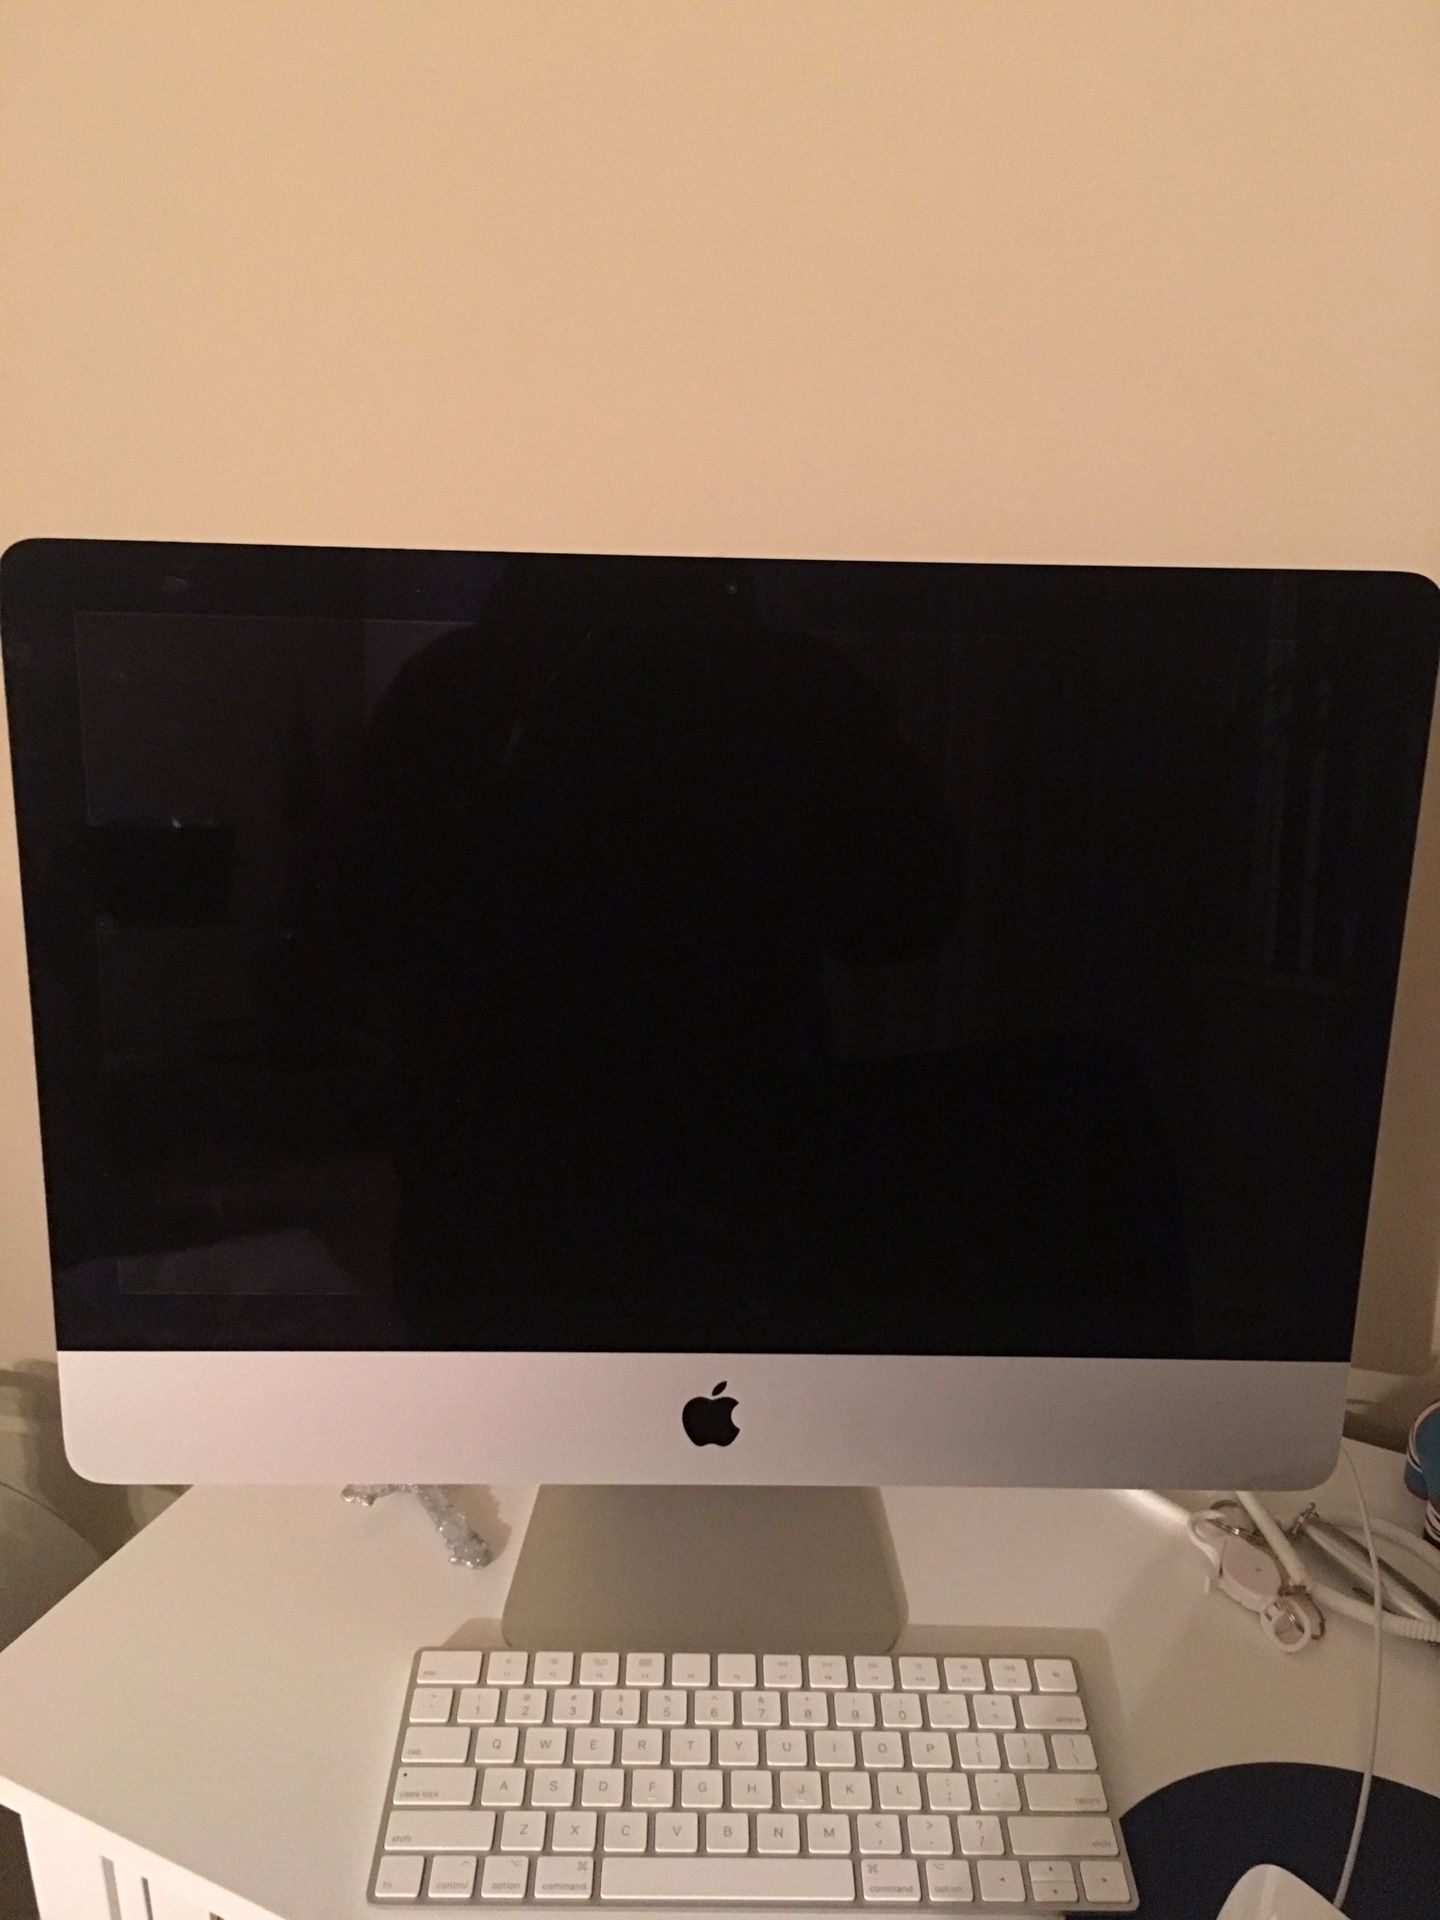 2017 Apple IMAC 21.5 desktop computer , with wireless mouse, keyboard and cord included